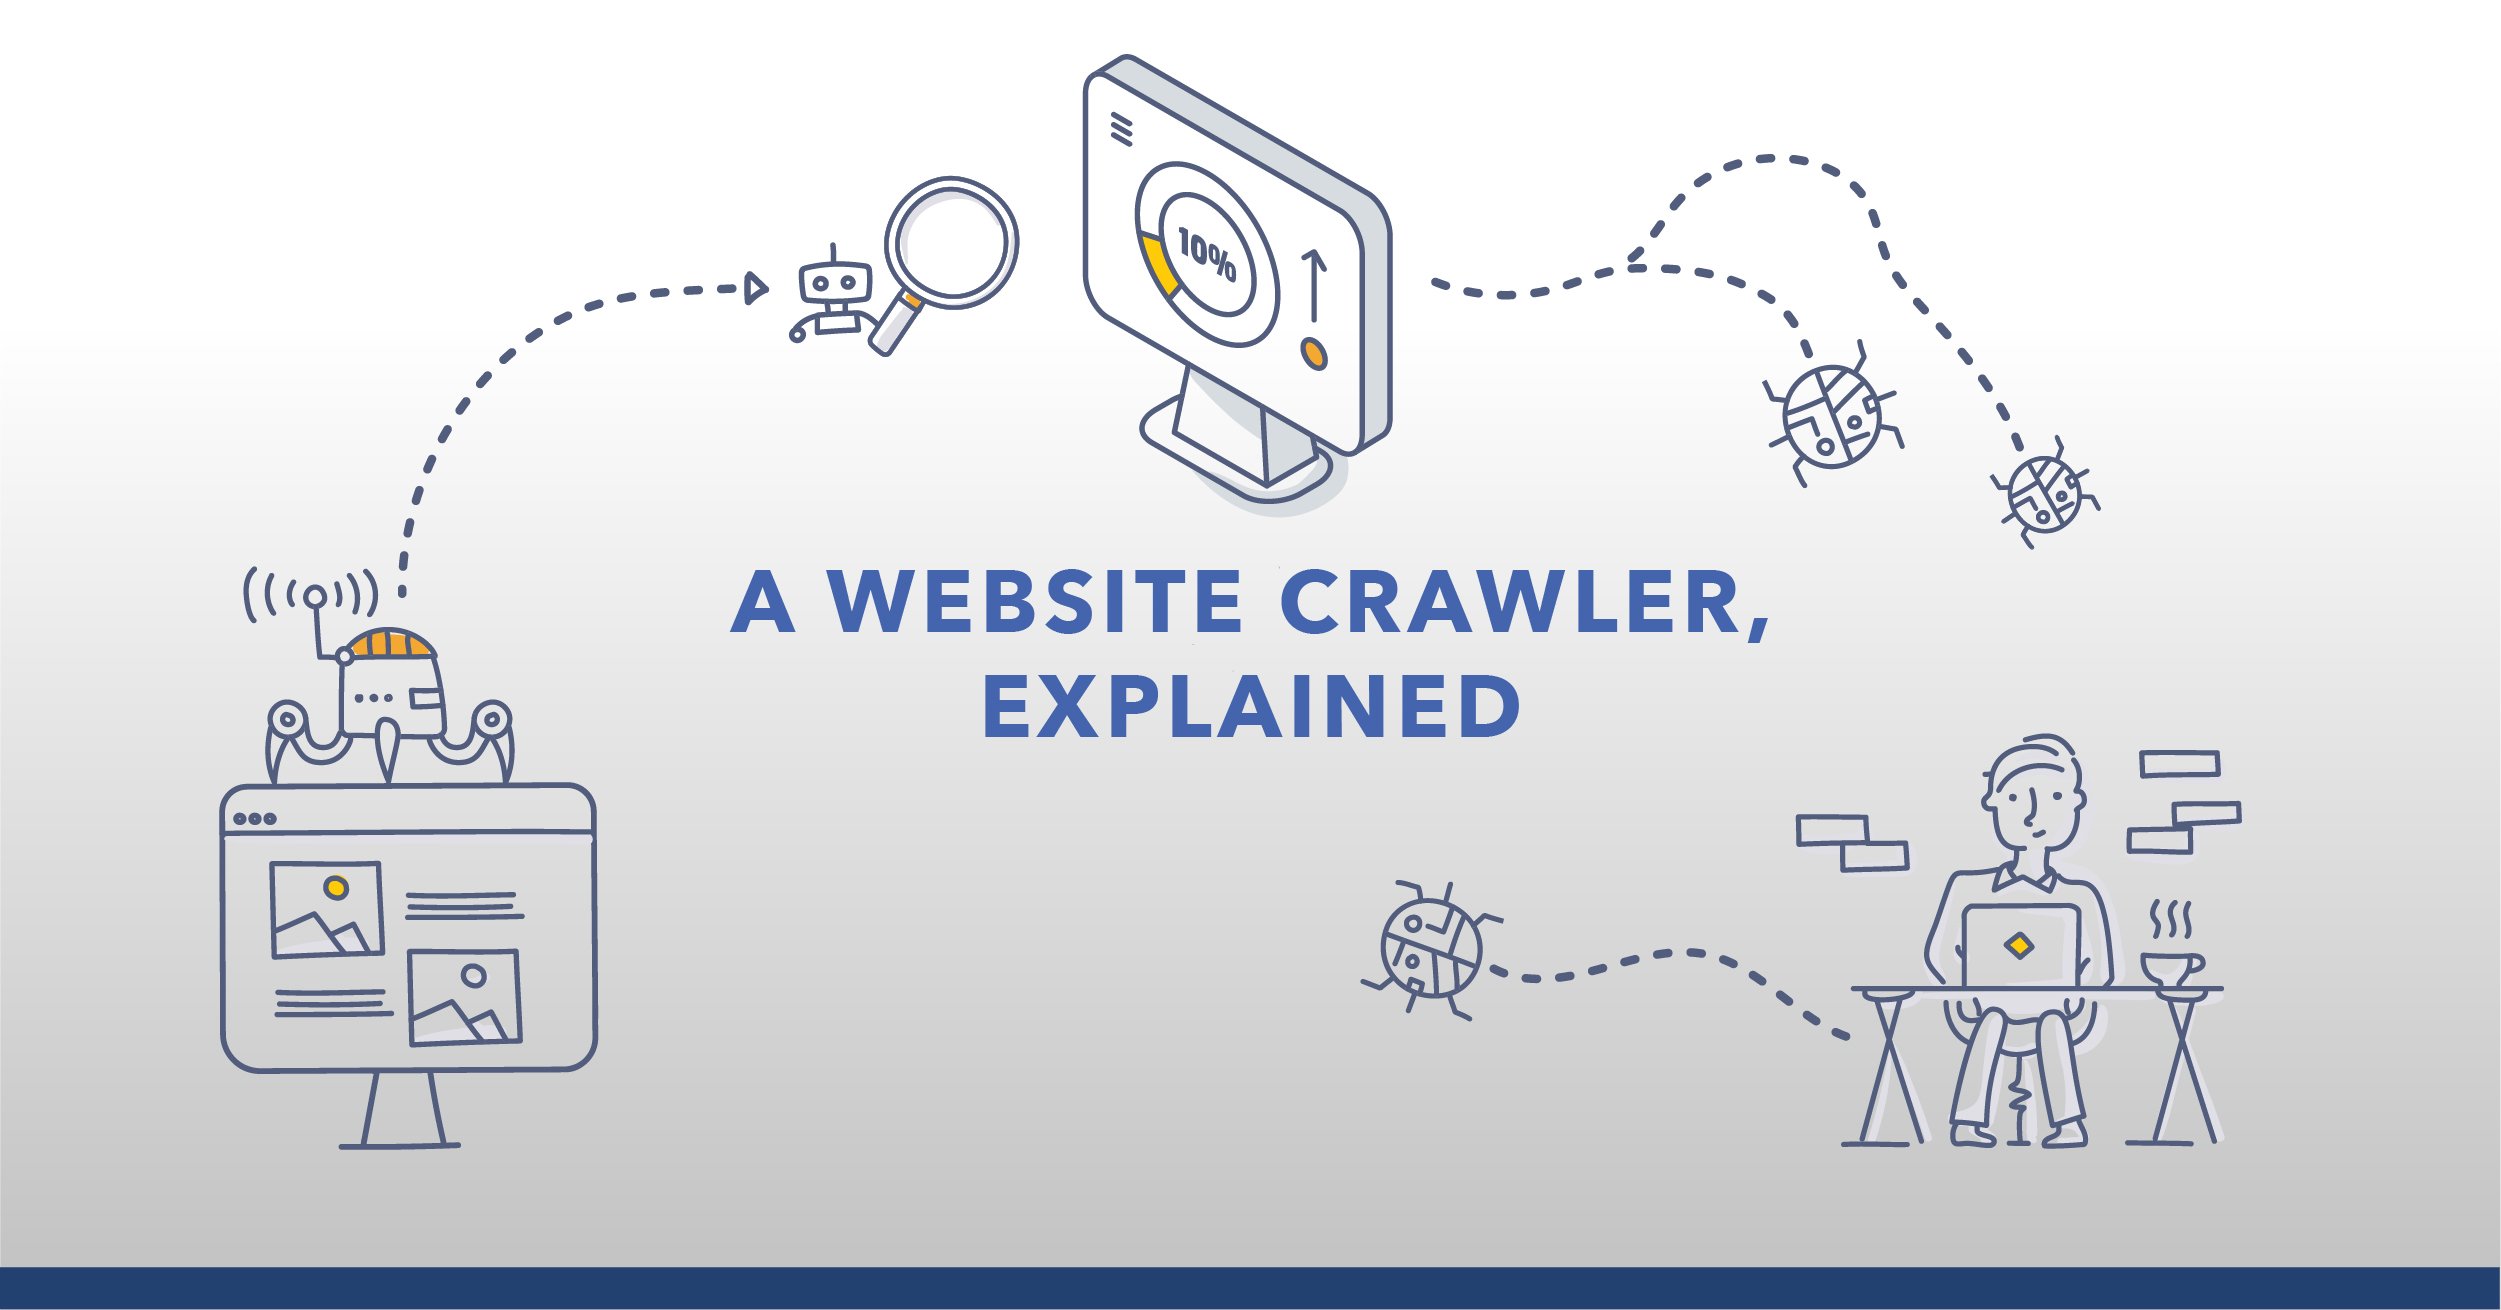 What is the relationship between crawlers and SEO?